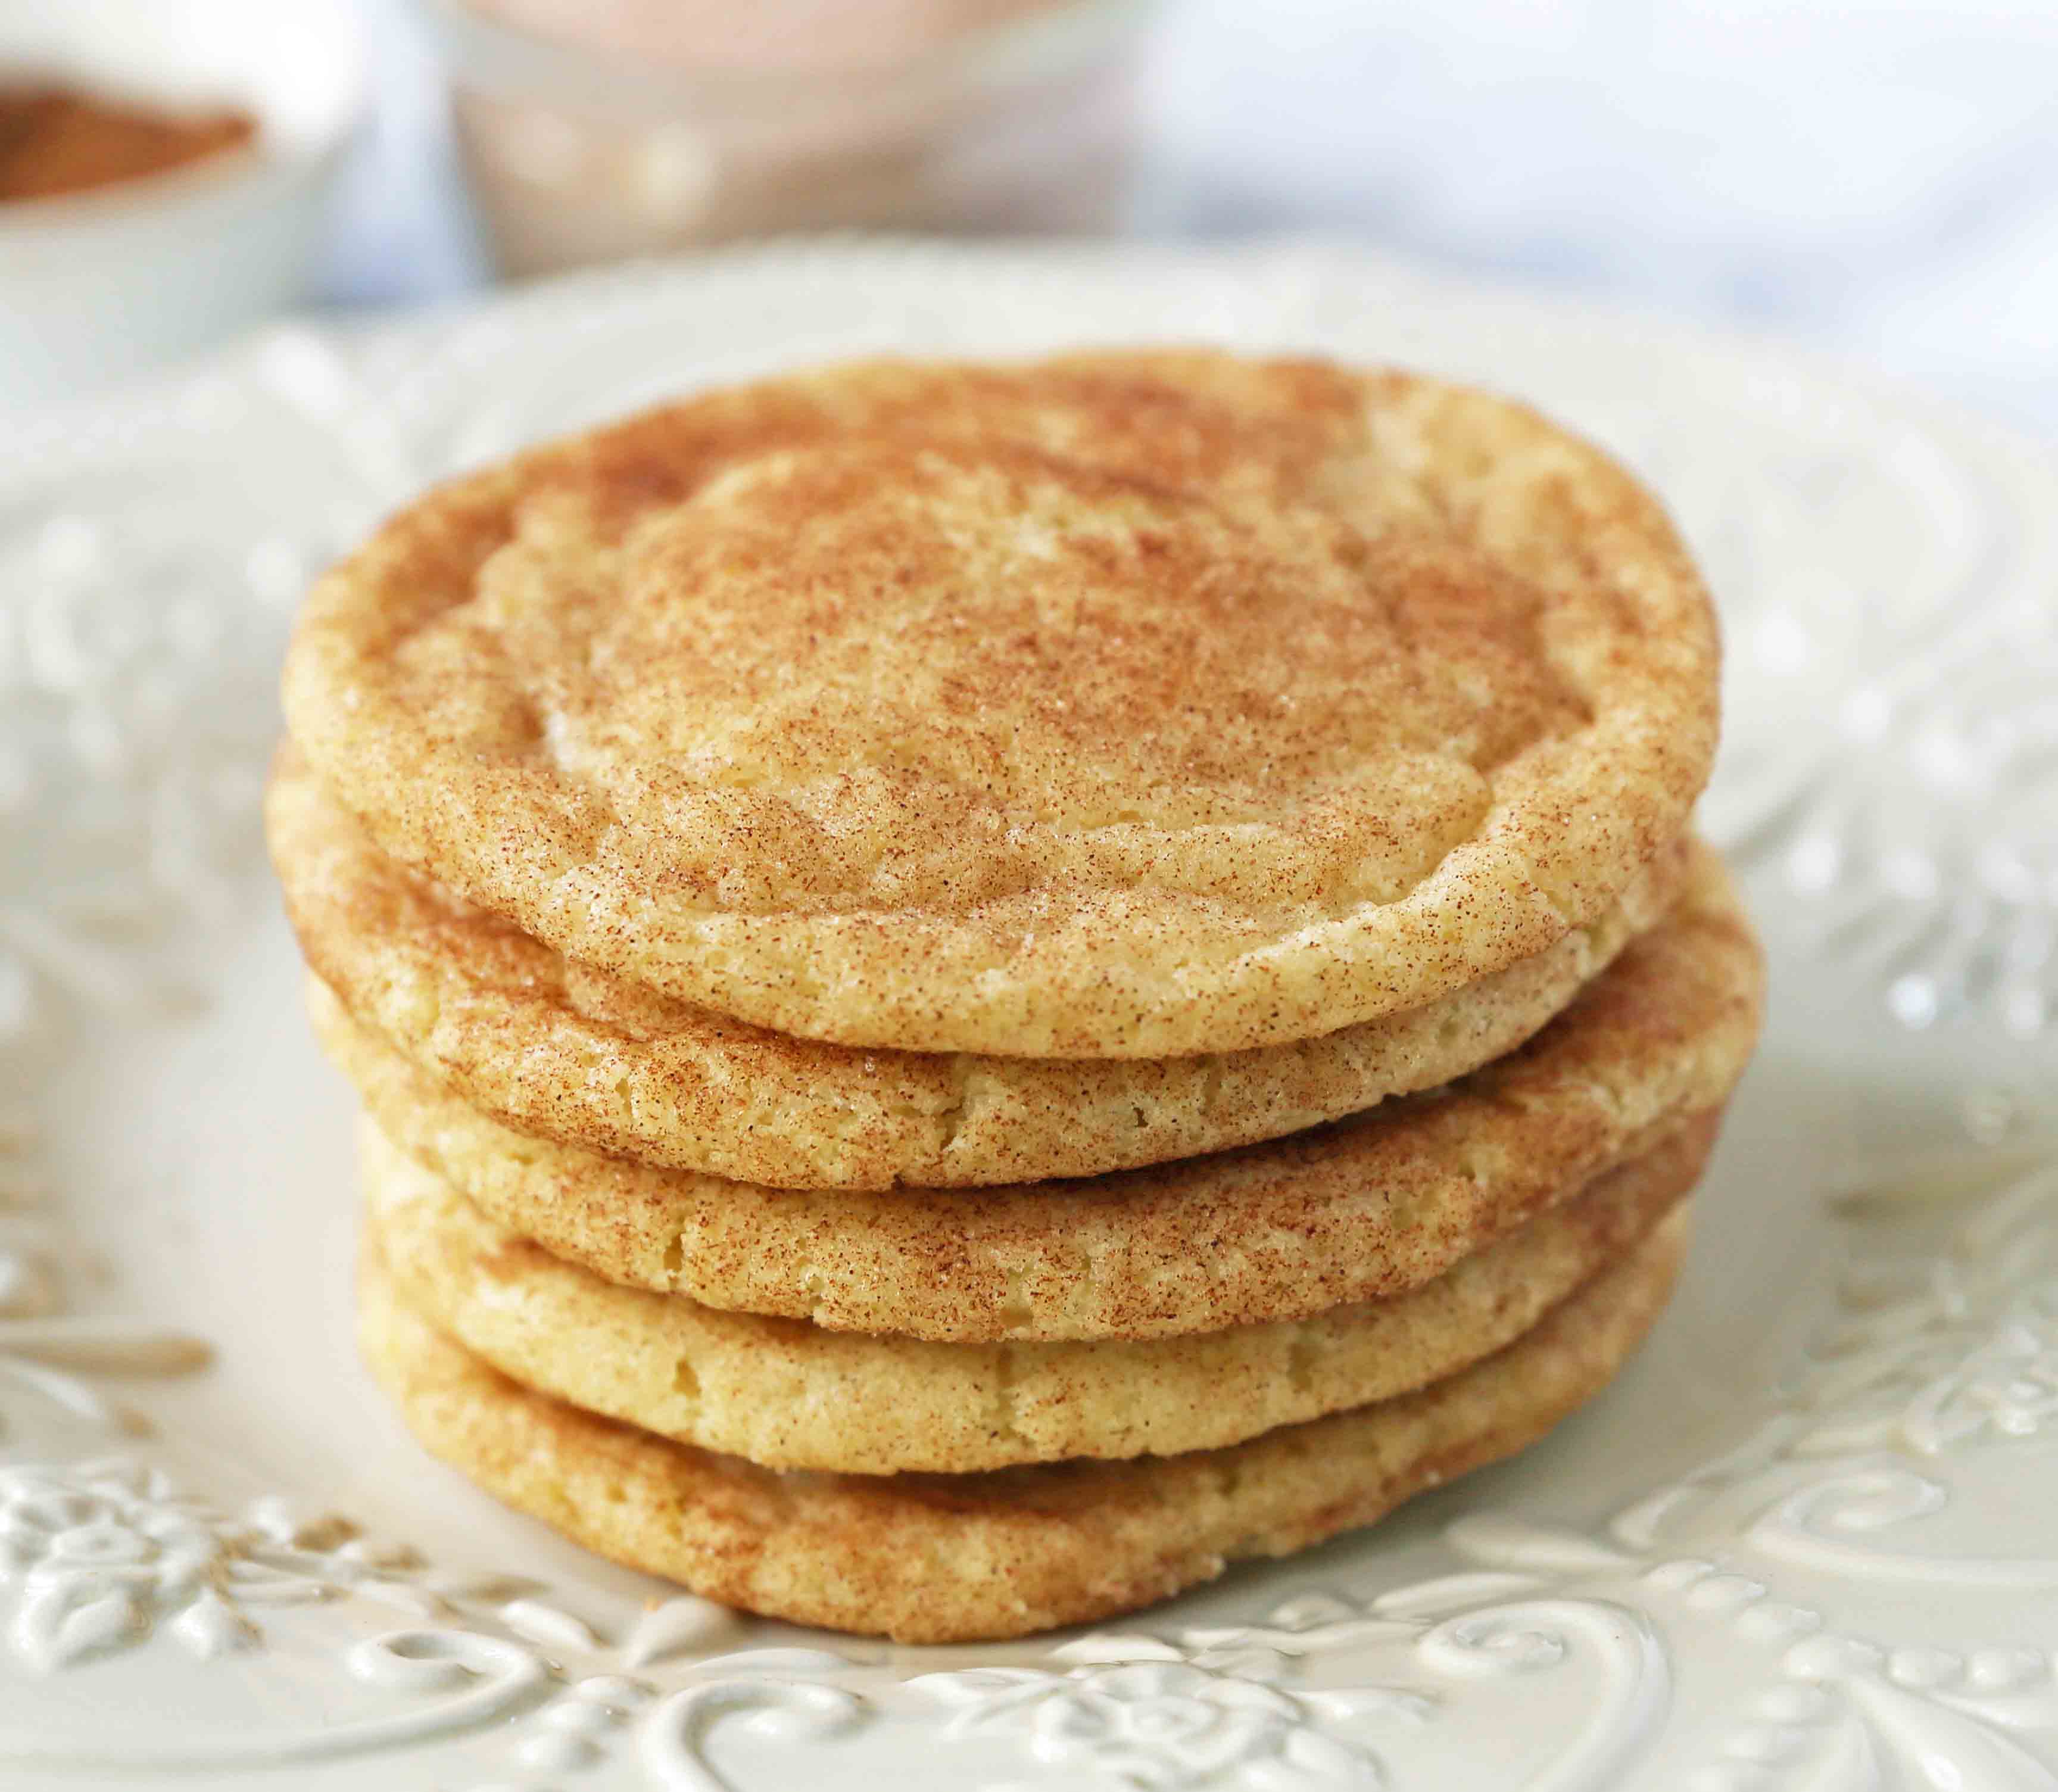 The Best Snickerdoodle Cookie Recipe. Soft and Chewy Snickerdoodle Cookies. The popular cinnamon-sugar soft and chewy sugar cookie recipe. A recipe that has been in the family for over 30 years! #snickerdoodle #snickerdoodles #snickerdoodlecookies #snickerdoodlecookie #cookie #cookies #christmascookies #christmascookies www.modernhoney.com